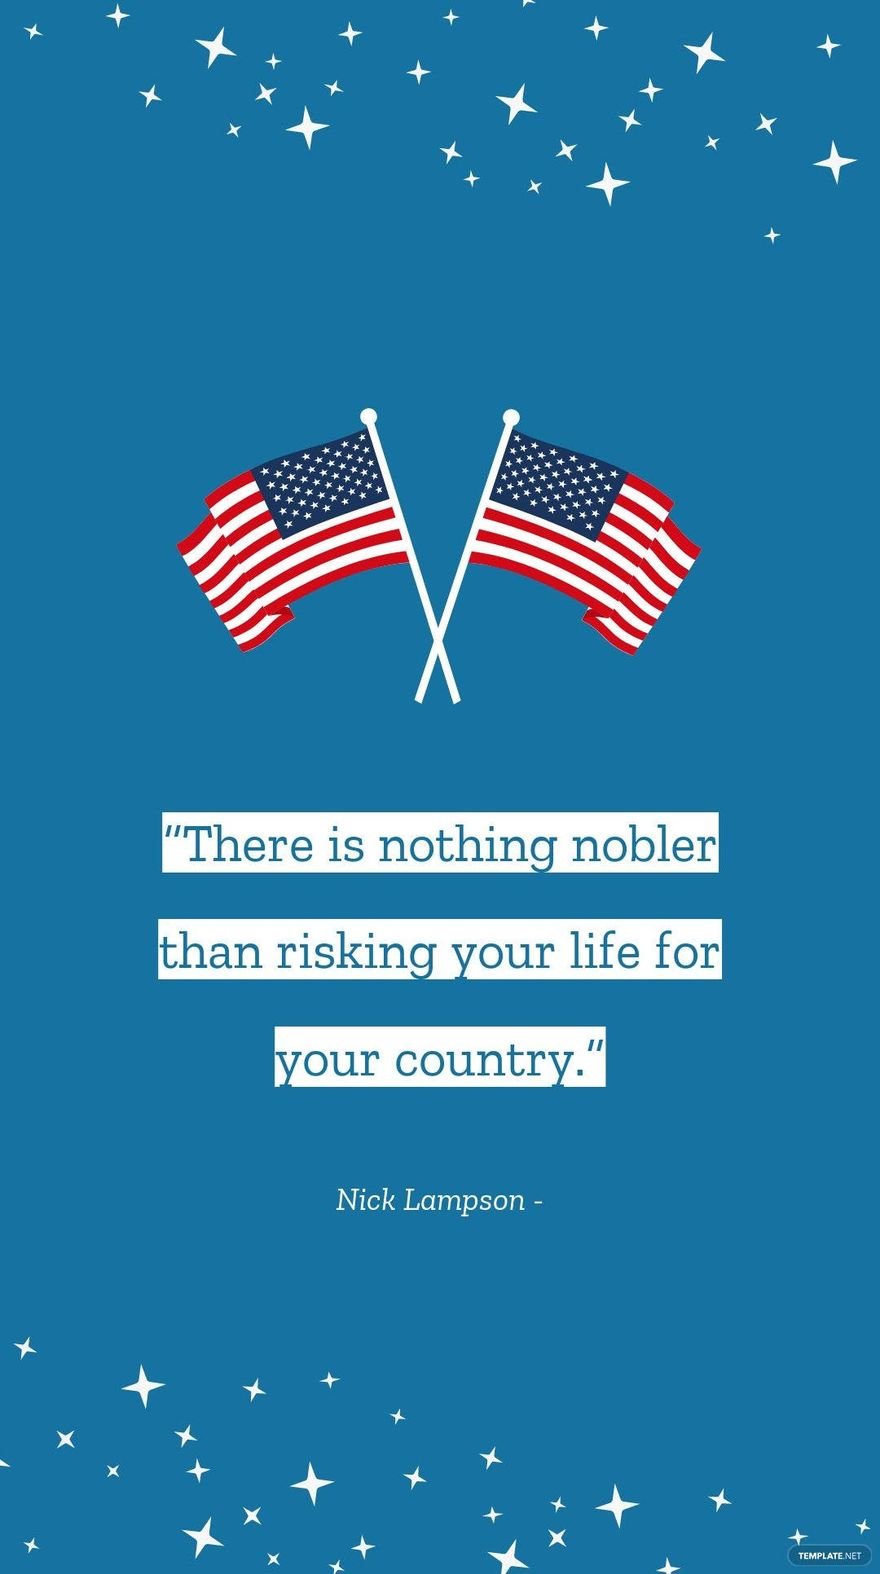 Nick Lampson - “There is nothing nobler than risking your life for your country.” in JPG